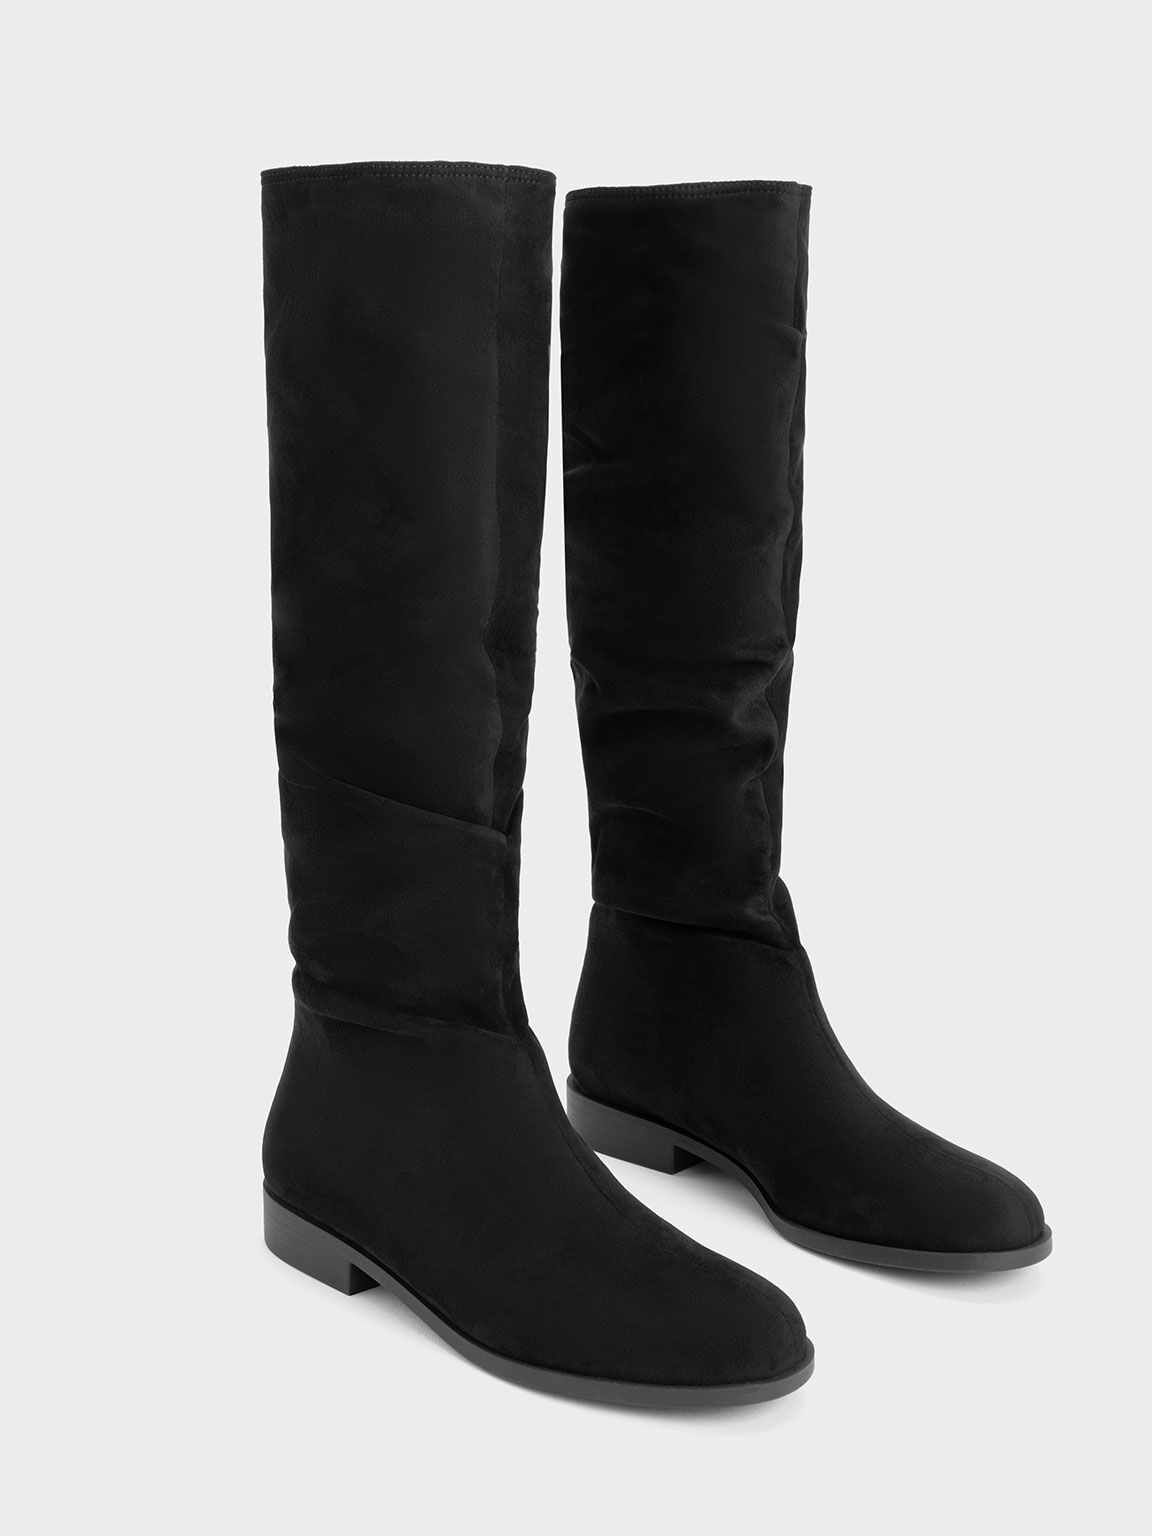 Black Textured Ruched Knee-High Boots - CHARLES & KEITH US